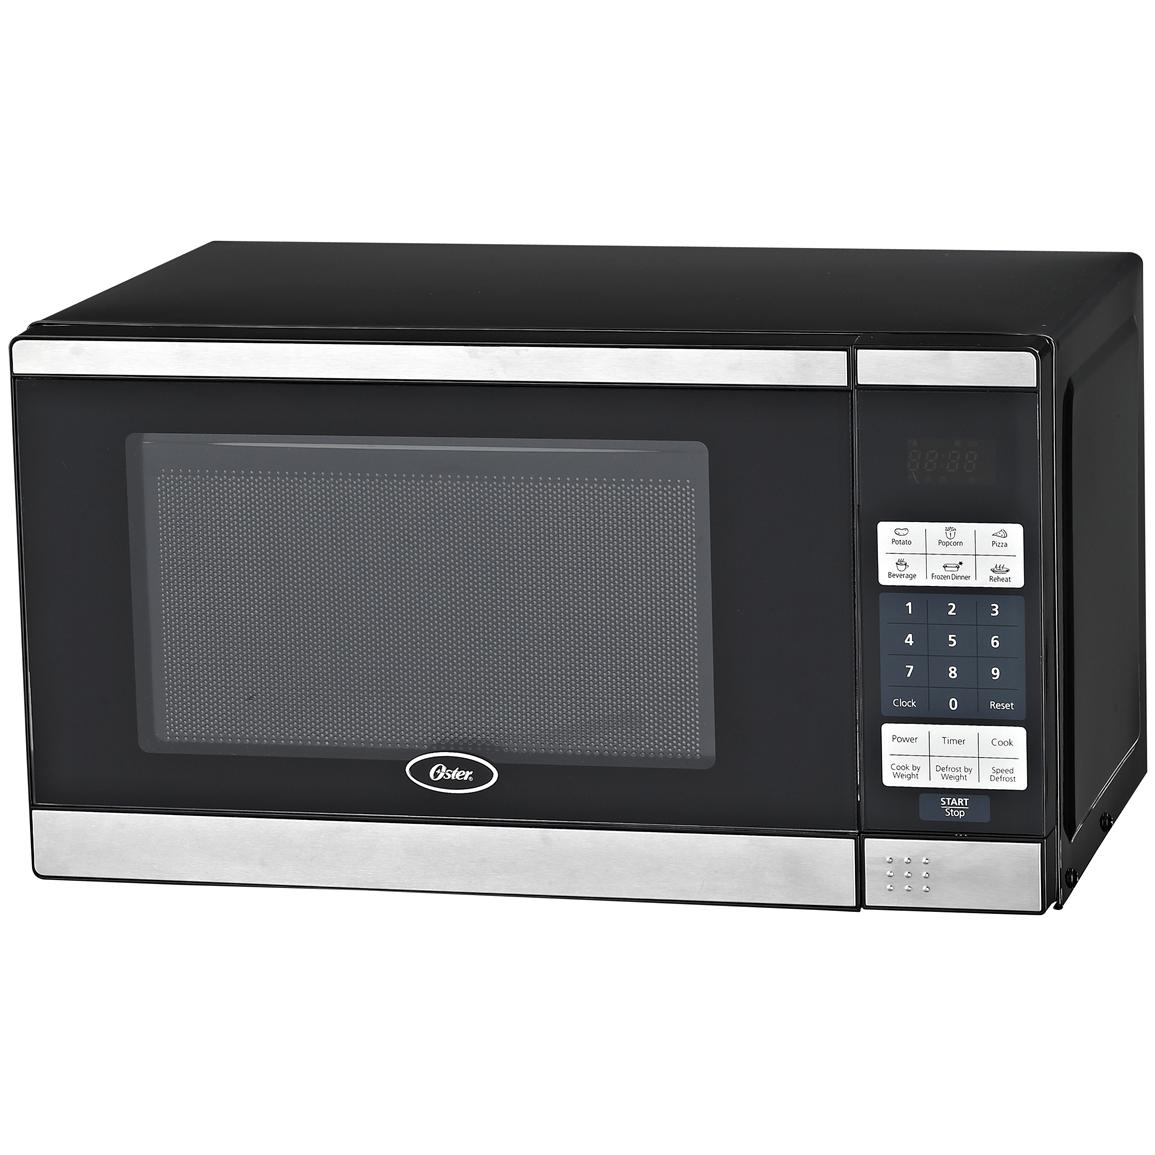 Oster® Stainless Steel 0.7 cu. ft. Digital Microwave Oven - 297398